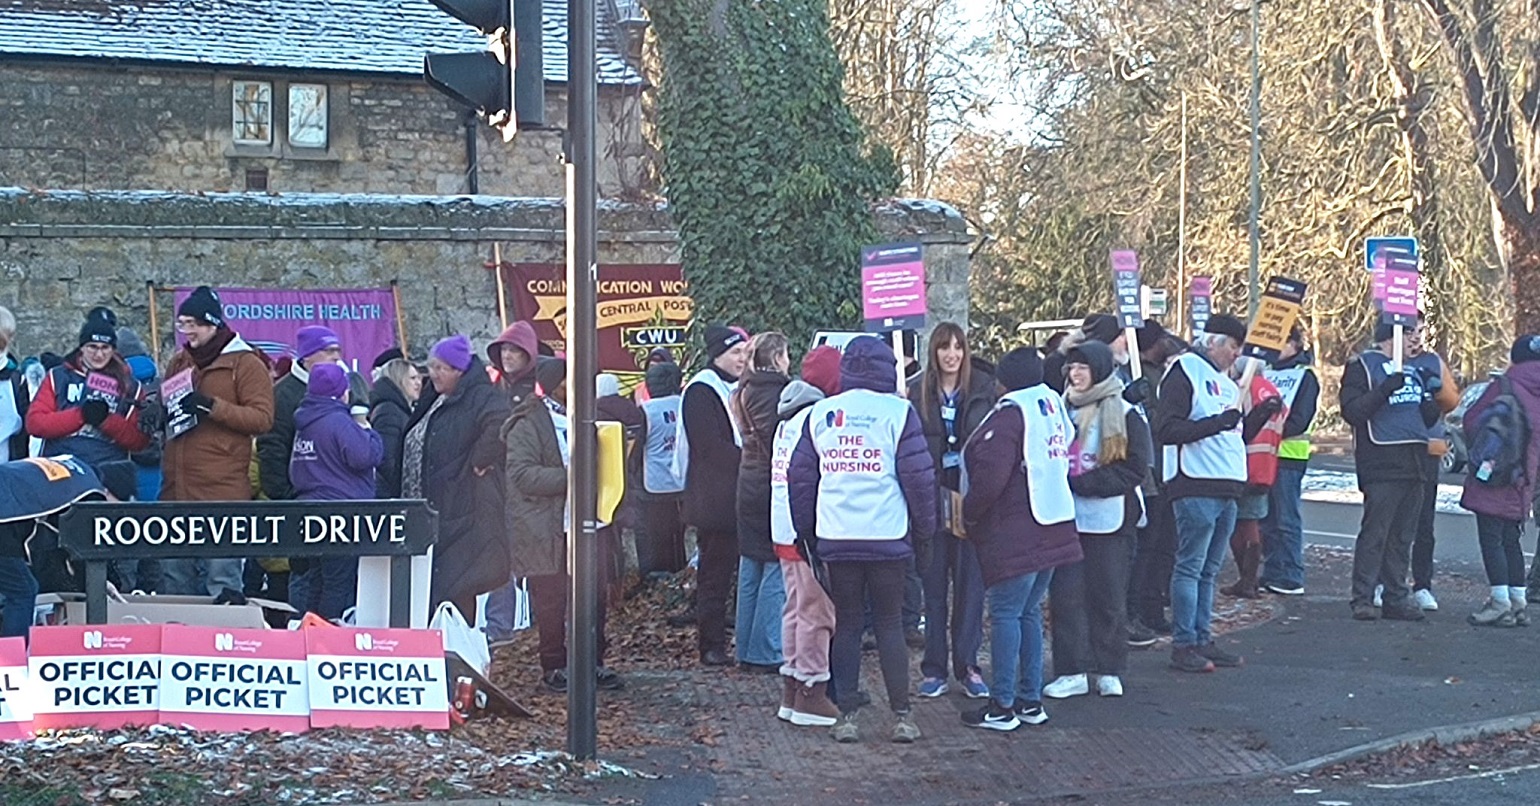 Photo of a picket line in Oxford during the nurses strikes